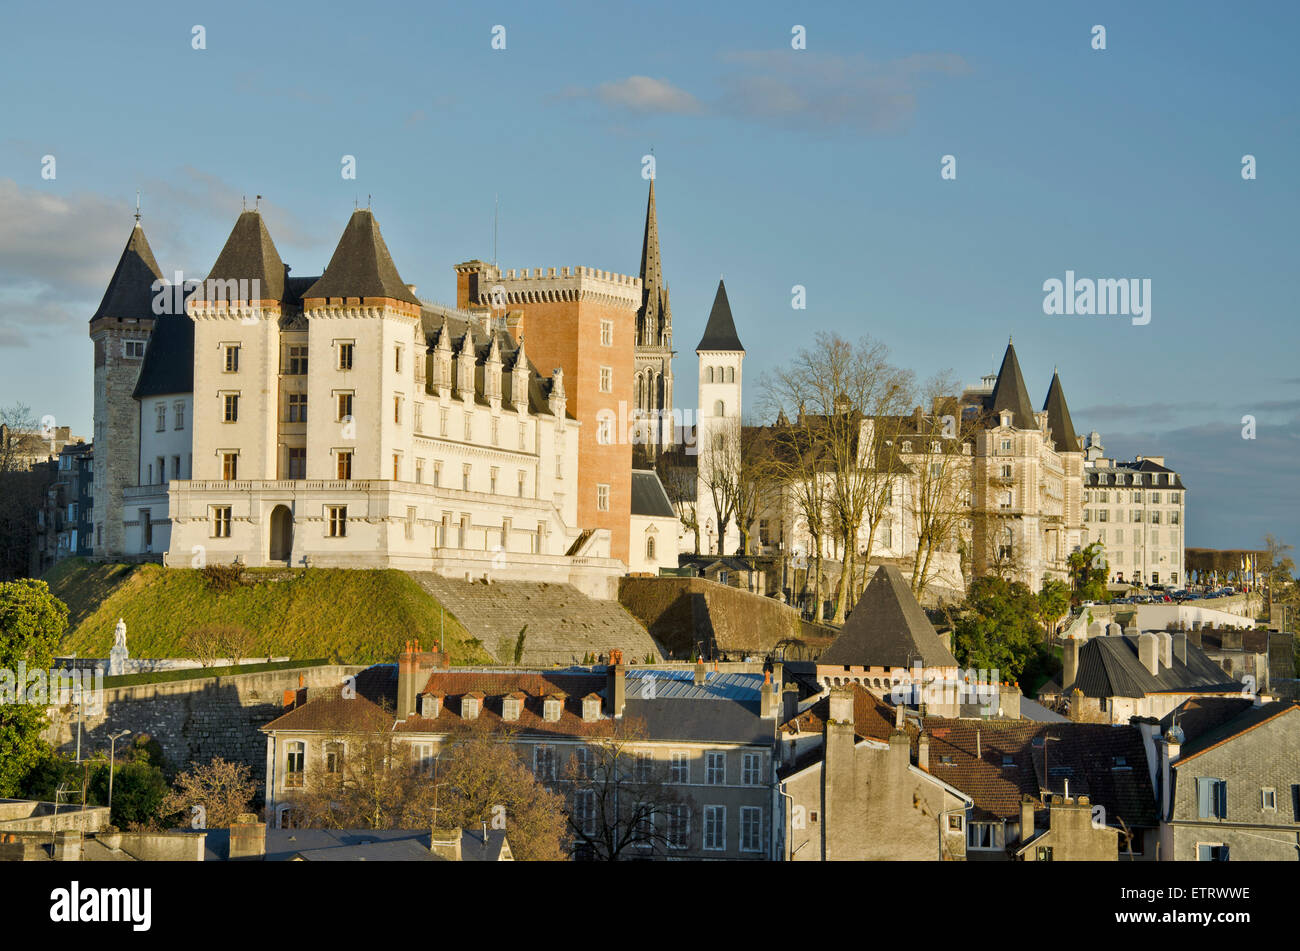 Historical center of Pau, capital of Bearn. Royal castle of the Rey of France Henri IV with Towers of Gaston Febus, followed by Stock Photo